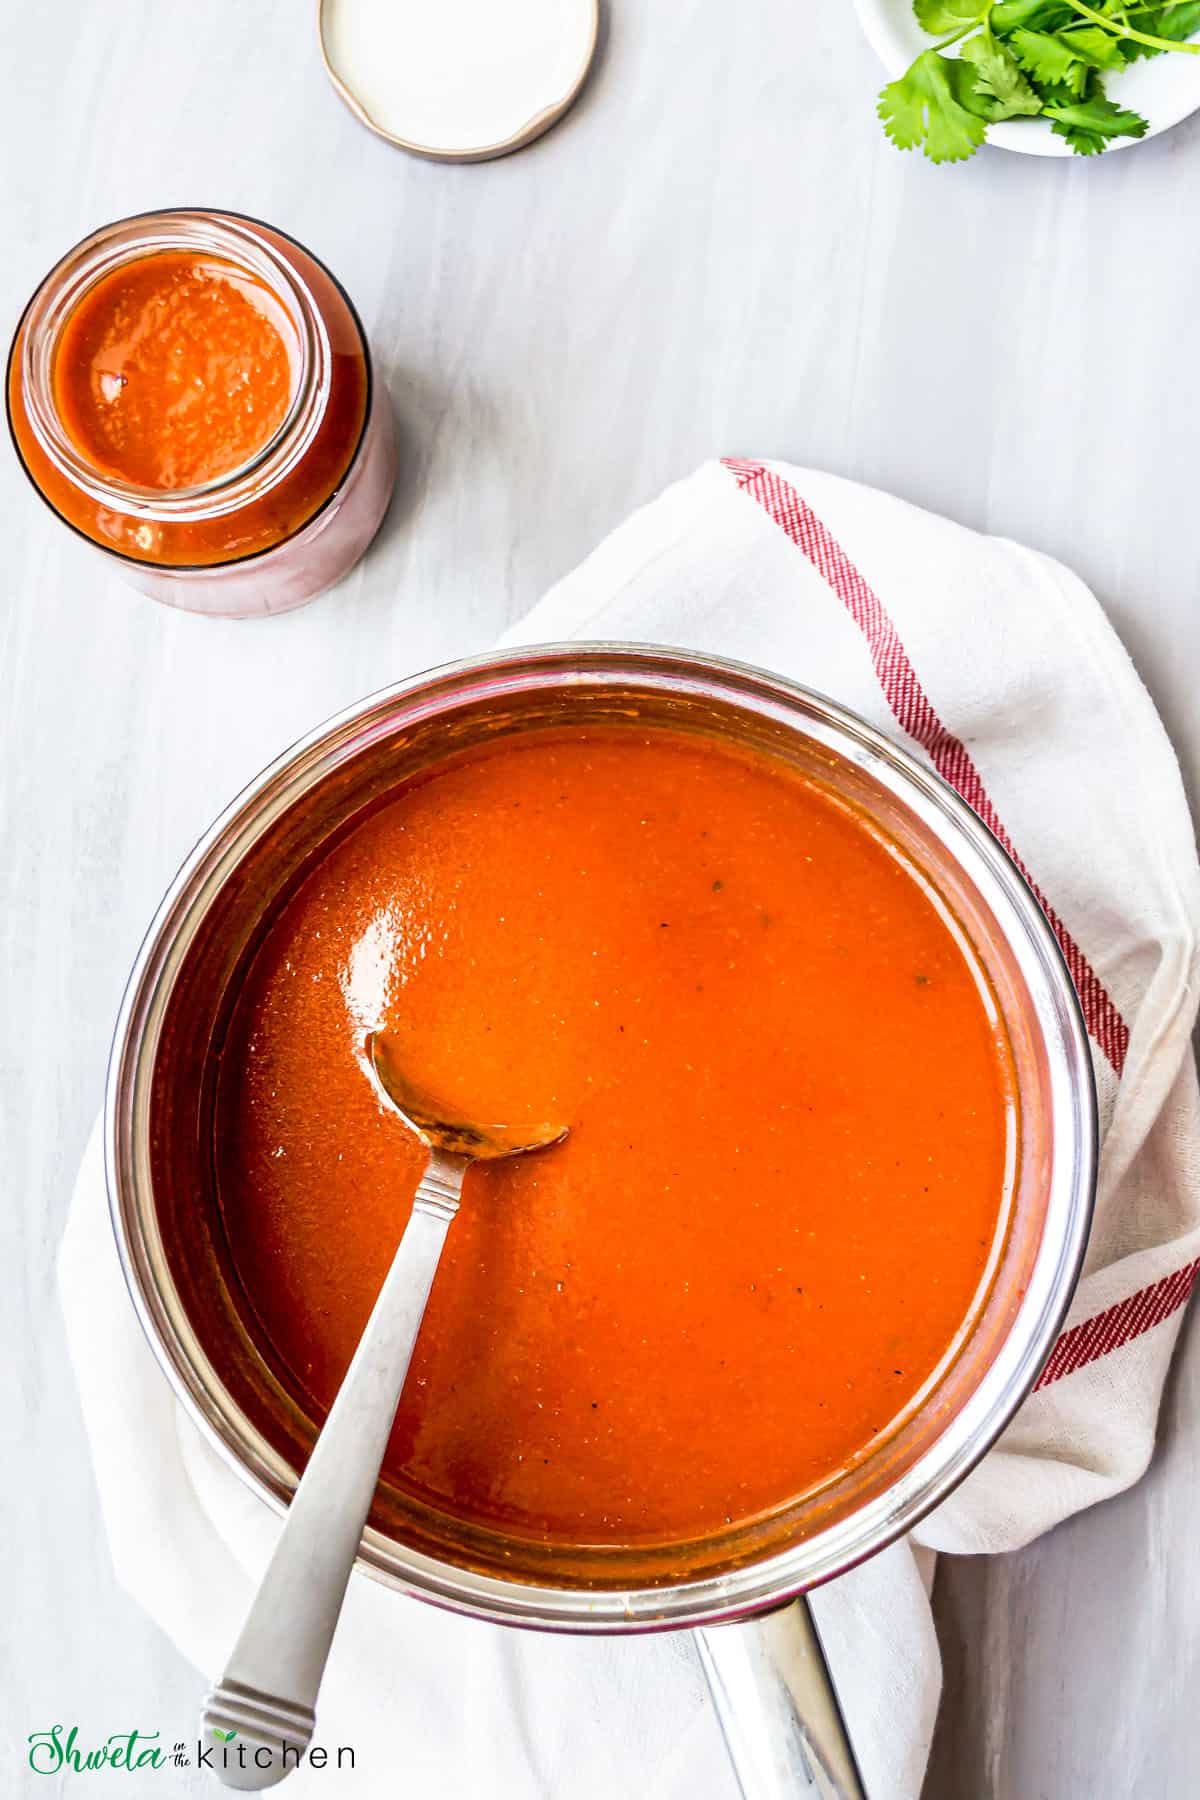 A spoon in a pot of the sauce on top of a white kitchen towel